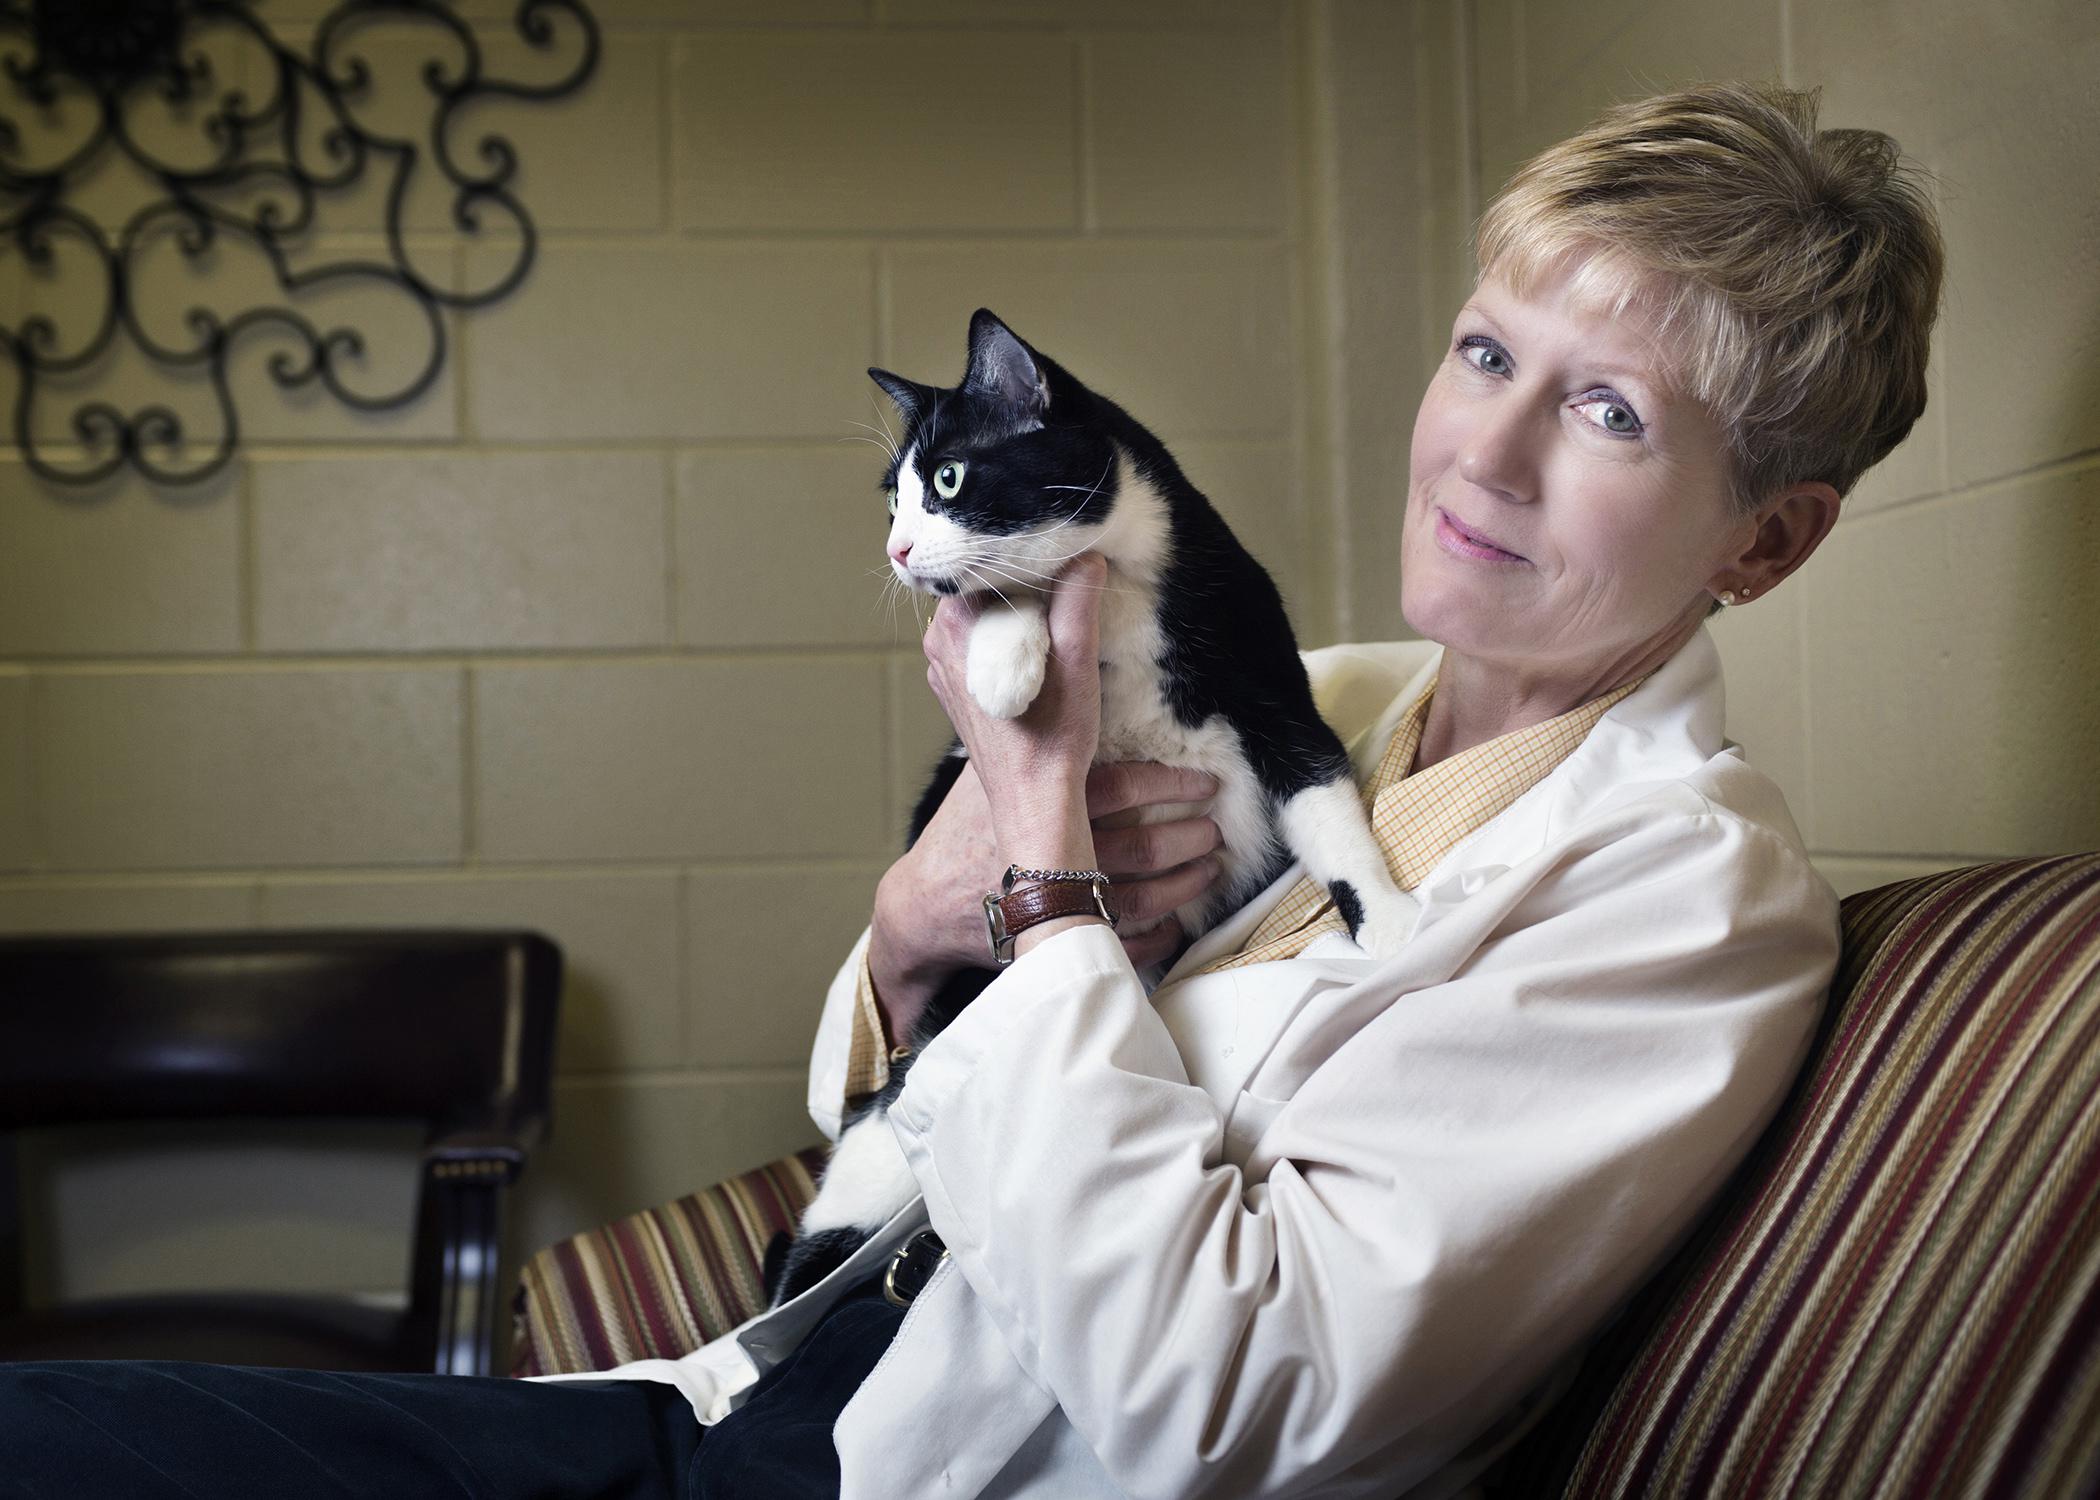 Dr. Sharon Fooshee Grace, a clinical professor in Mississippi State University's College of Veterinary Medicine, has a passion to protect the vulnerable. She works with a domestic violence shelter to provide care for victims' pets, many of which may also need protection and medical care. (Photo by MSU Public Affairs/Megan Bean)